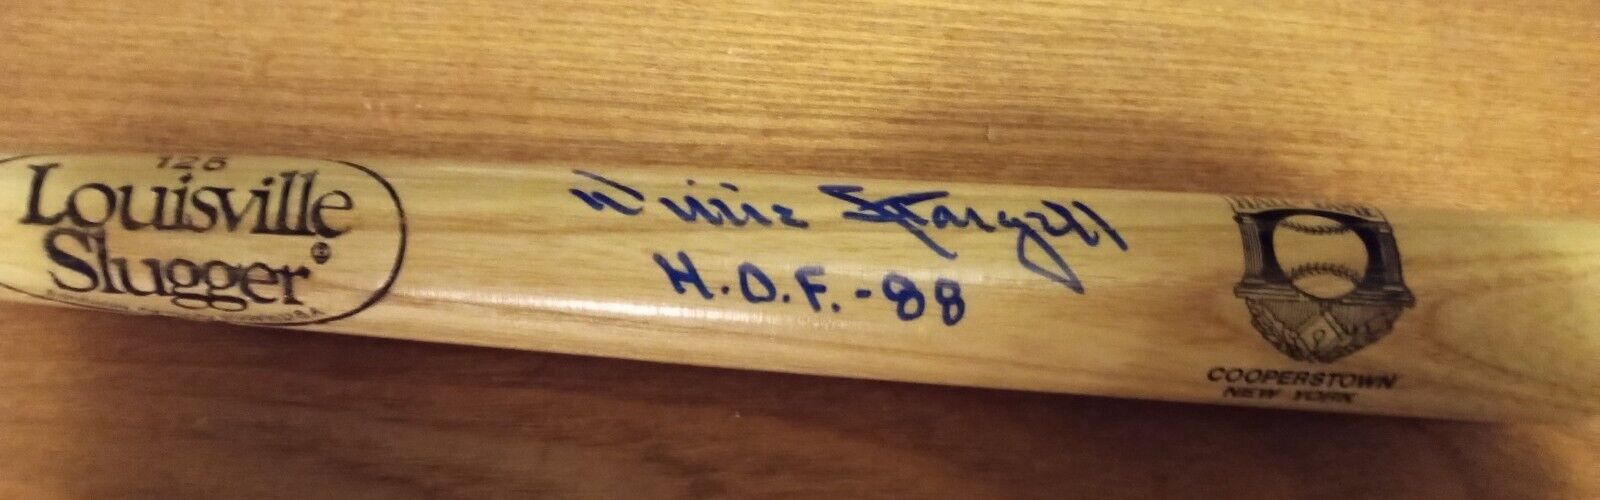 Willie Stargell Signed Autographed Mini Baseball Bat With HoF 88